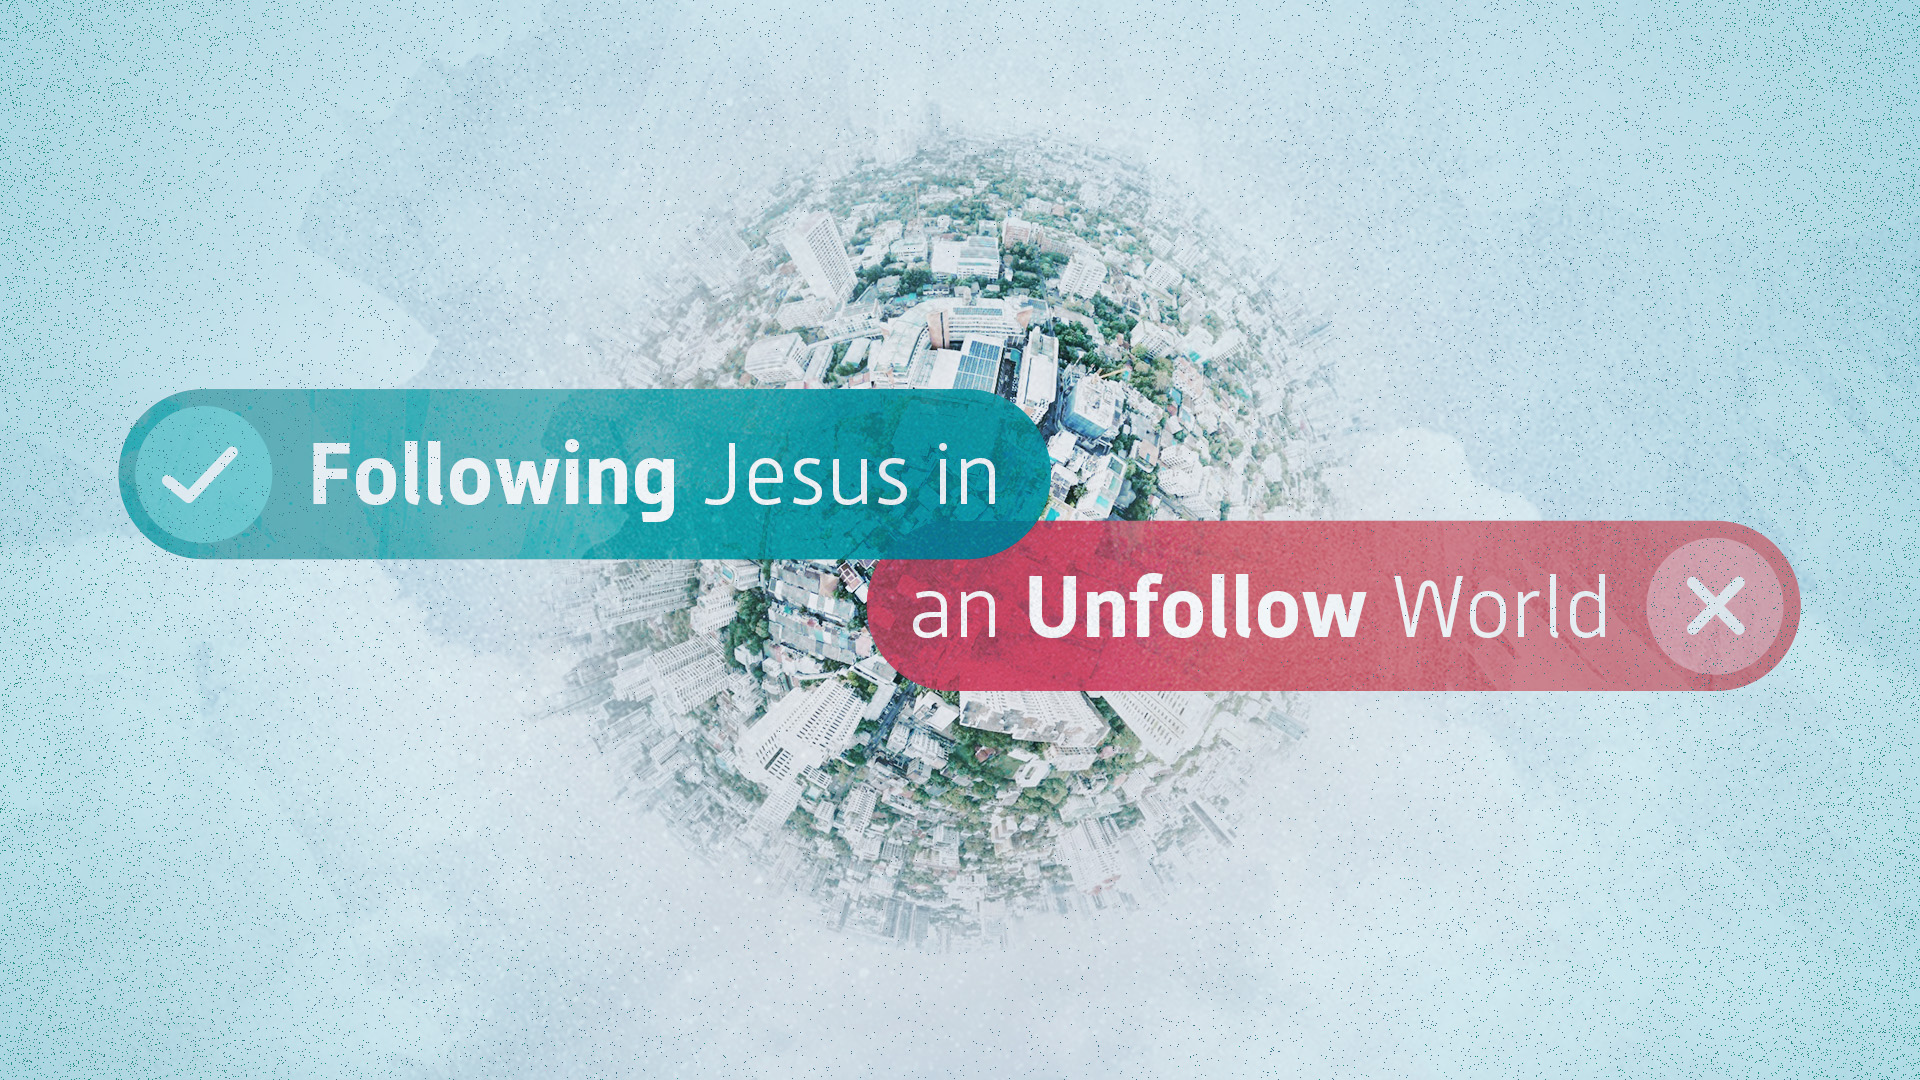 Why I Want to Follow Christ